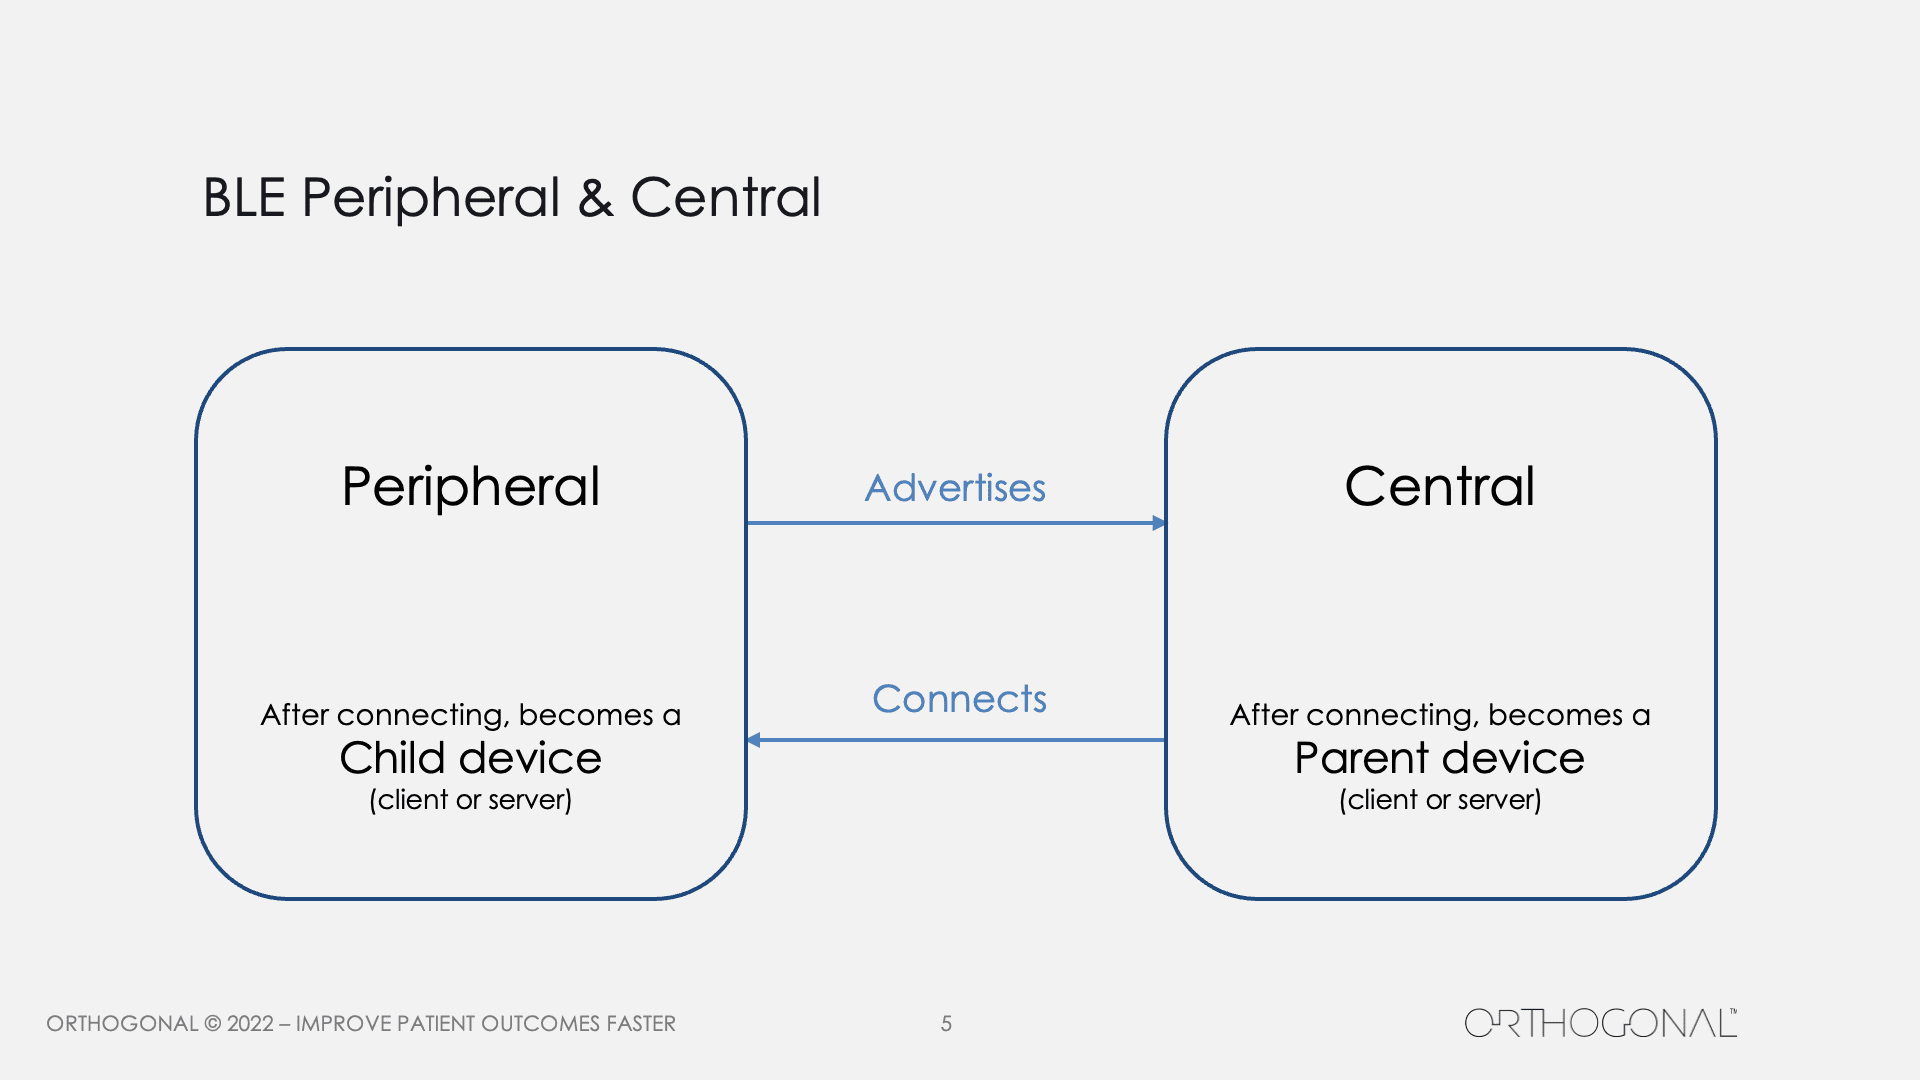 BLE Peripheral and Central